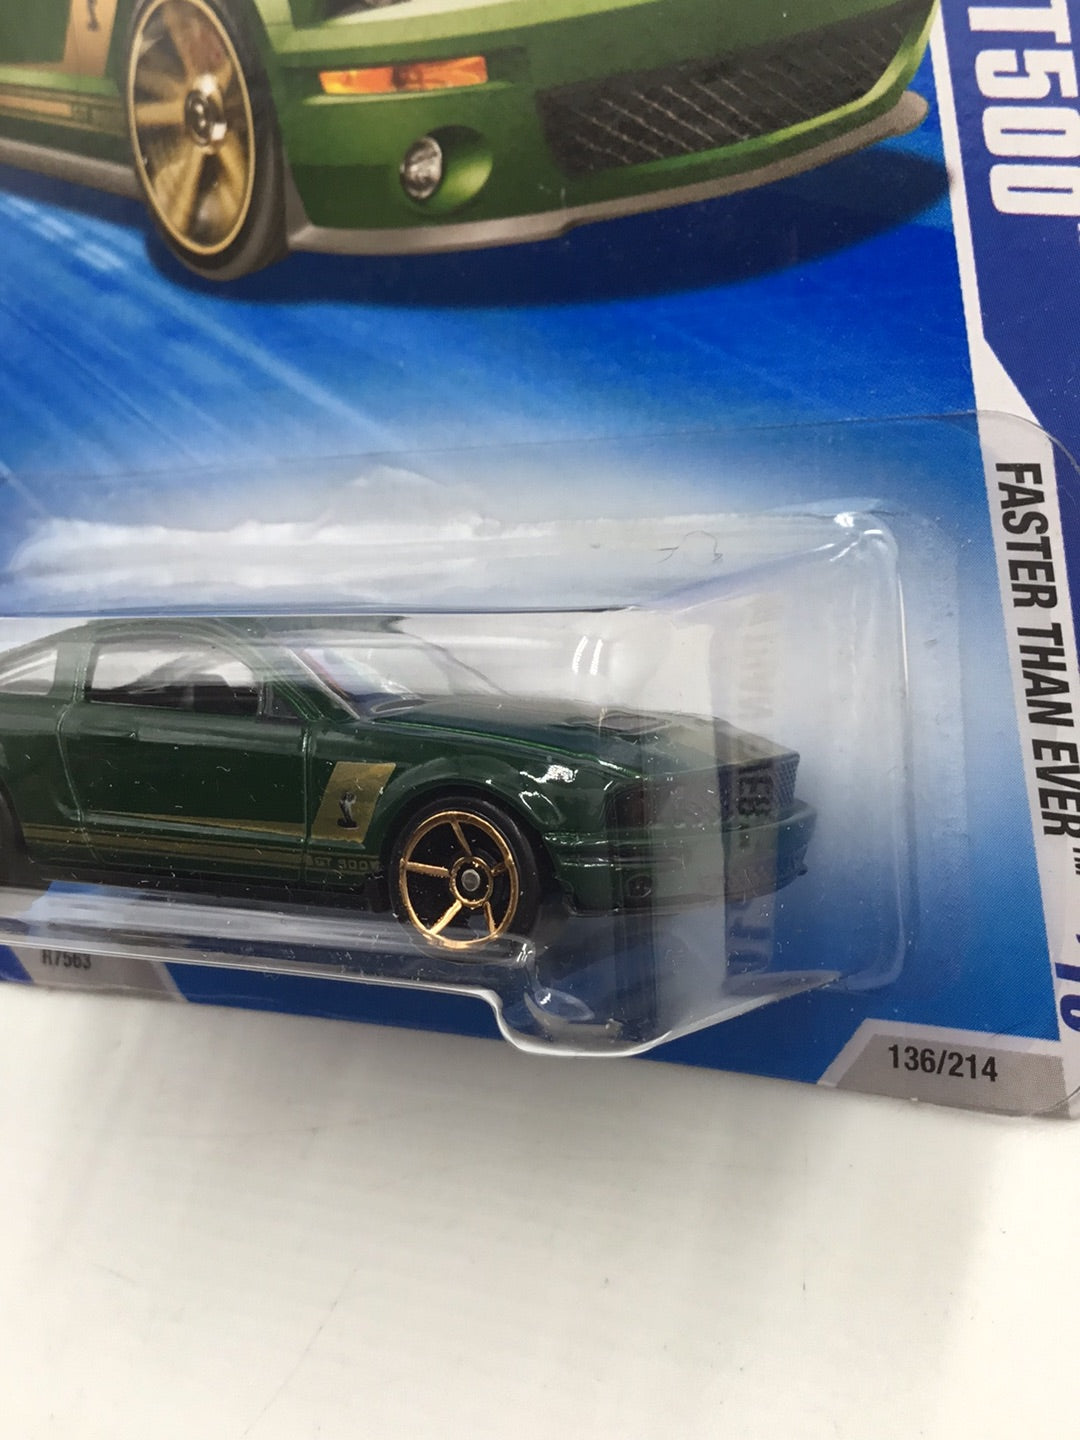 2010 Hot Wheels #136 2007 Ford Shelby Gt500 Green JJ7